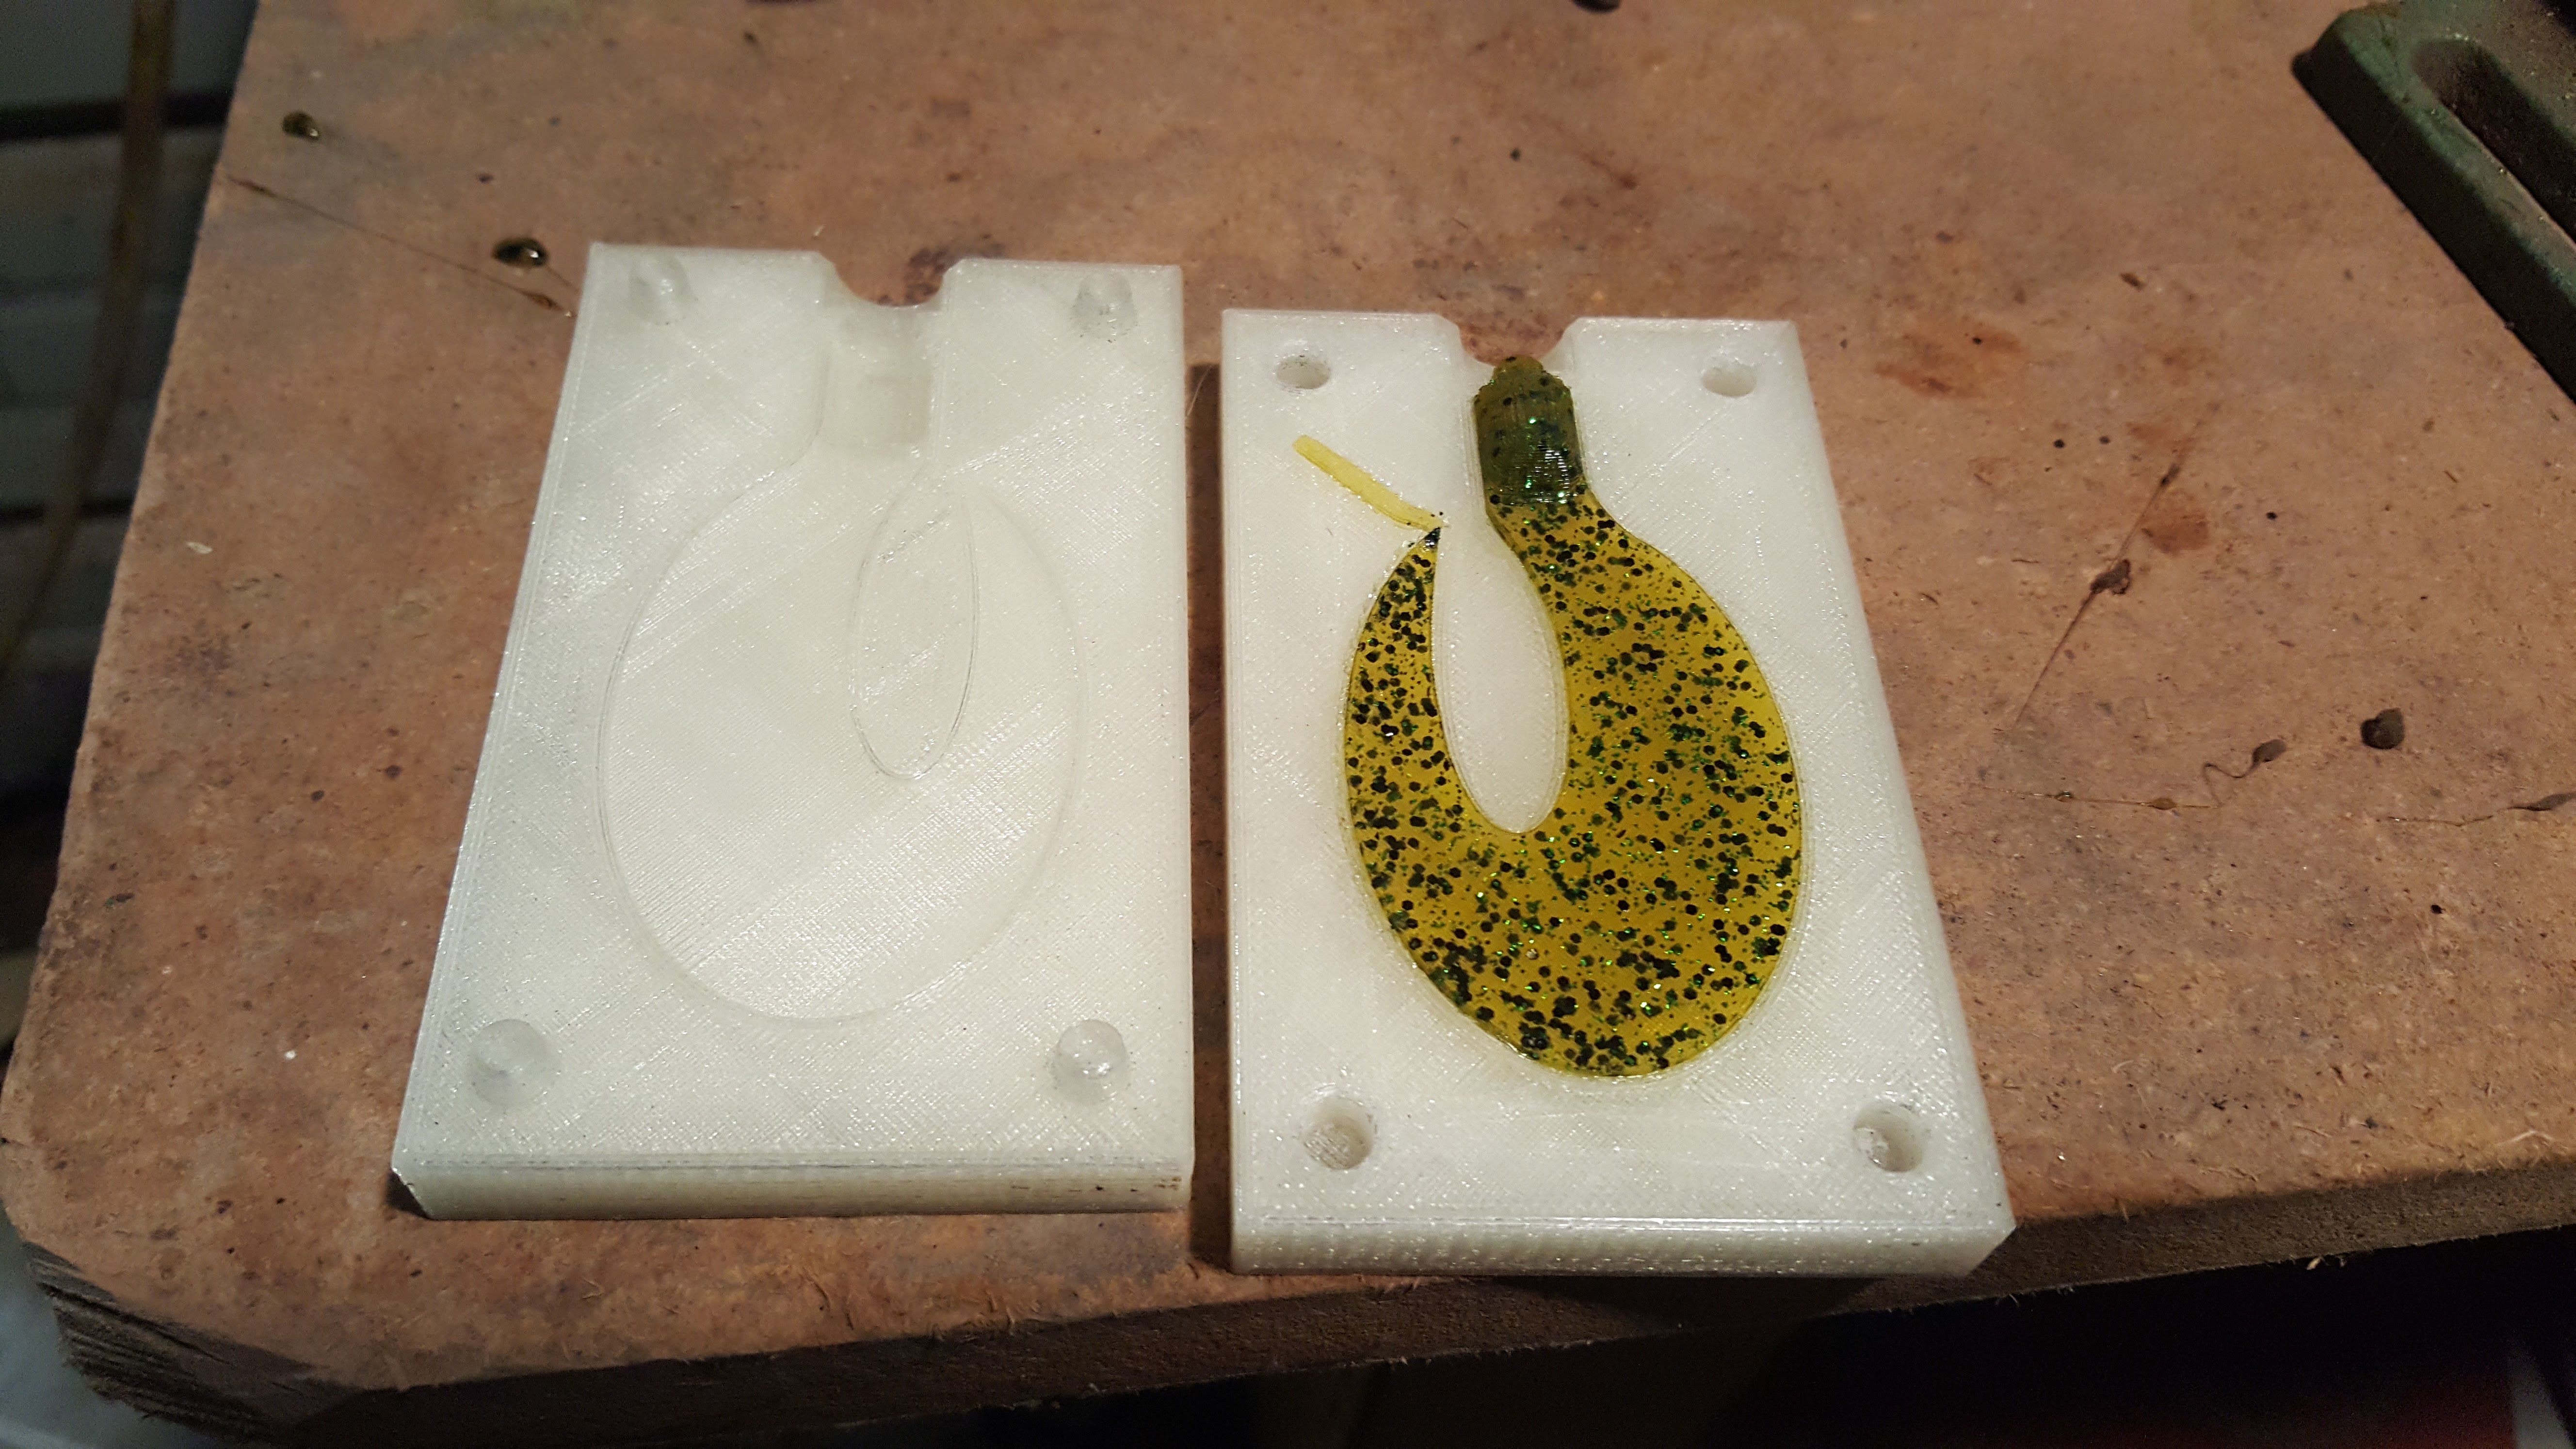 I printed an injection mold for soft plastic lures. They work. Best is 45